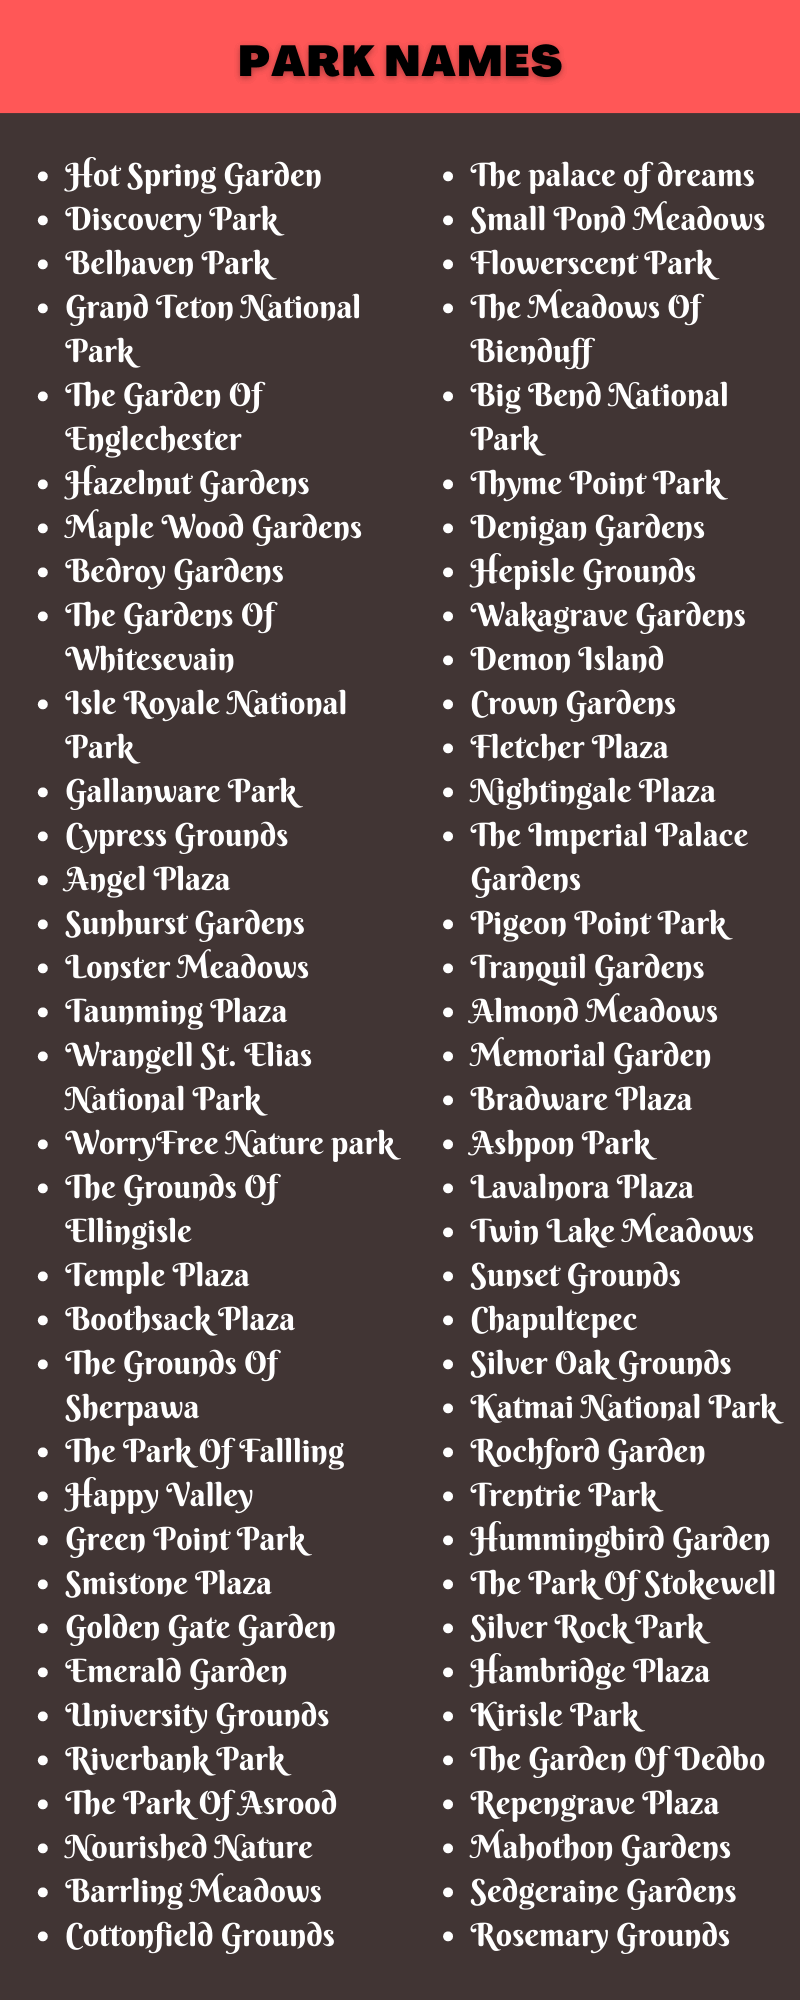 400 Inspiring Park Names Ideas and Suggestions